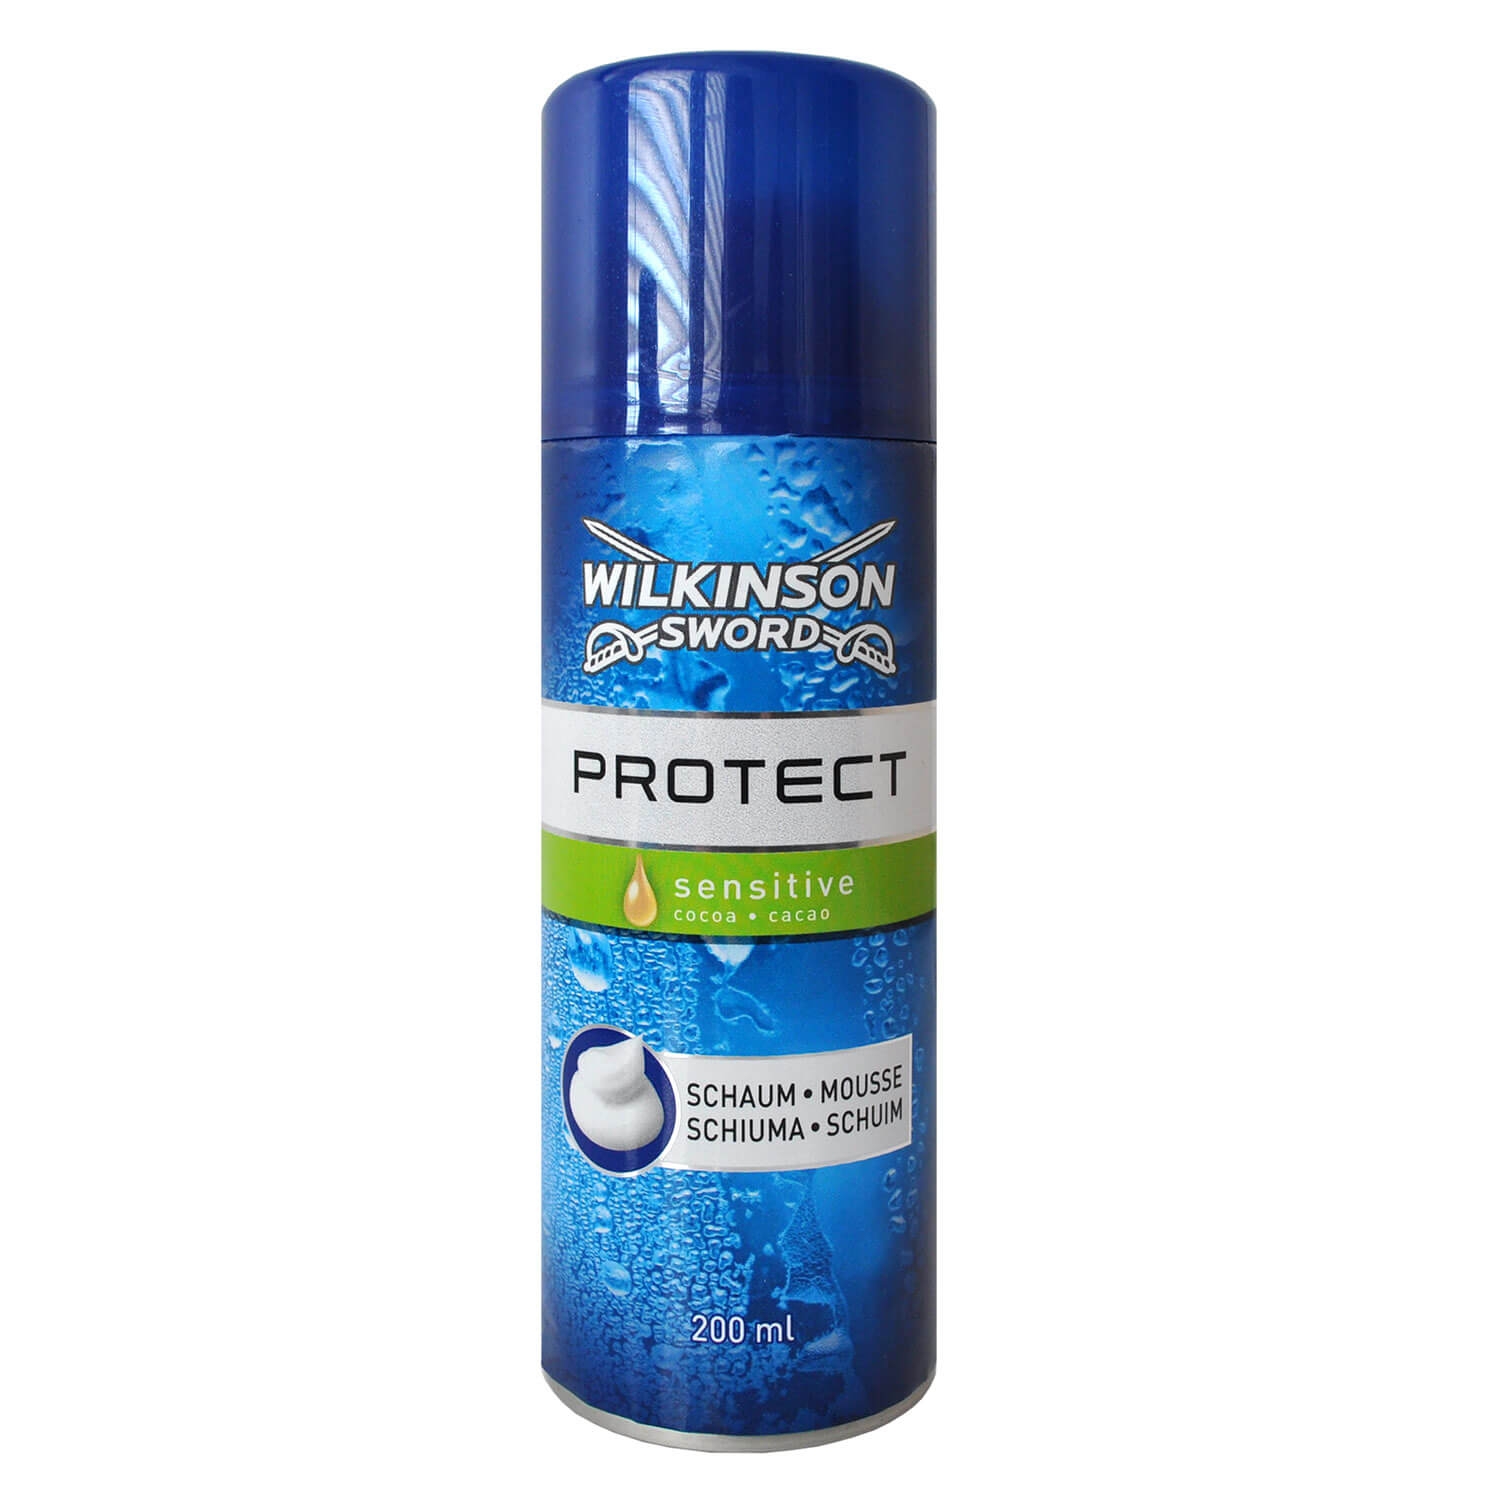 Product image from Protect - Rasierschaum sensitive